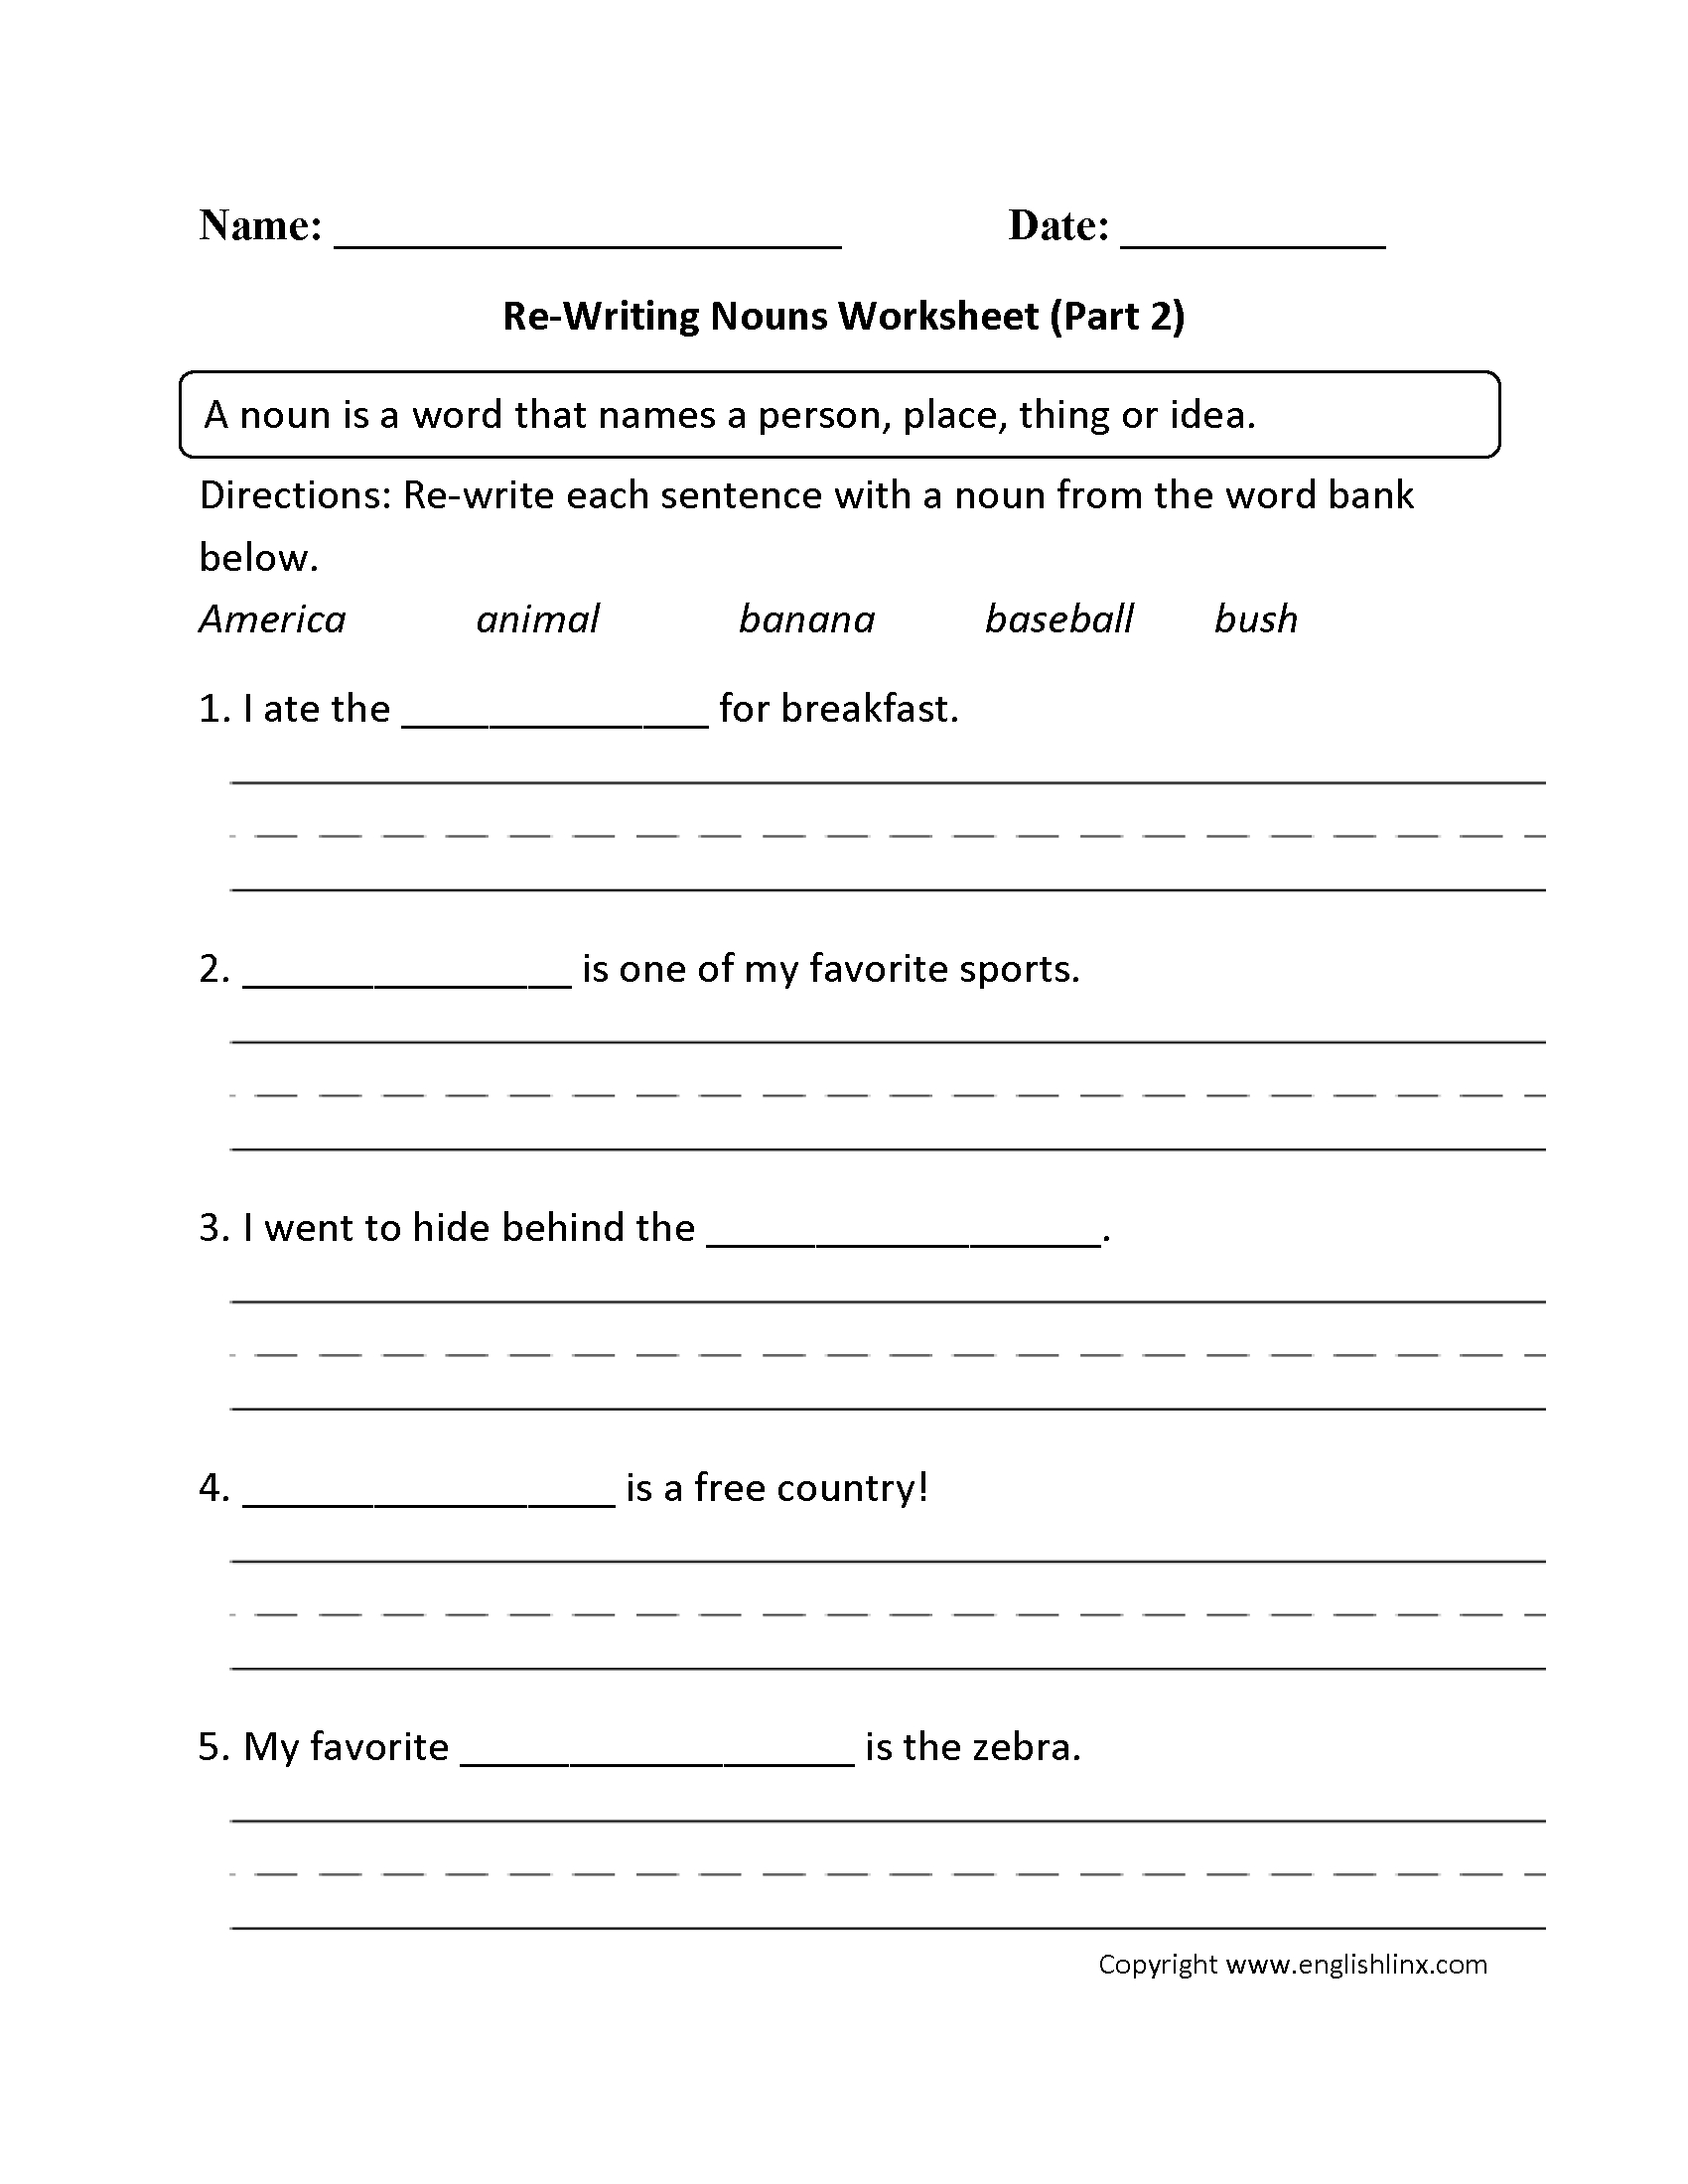 identifying-nouns-worksheets-for-grade-3-hairstyles-ideas-yep-thats-it